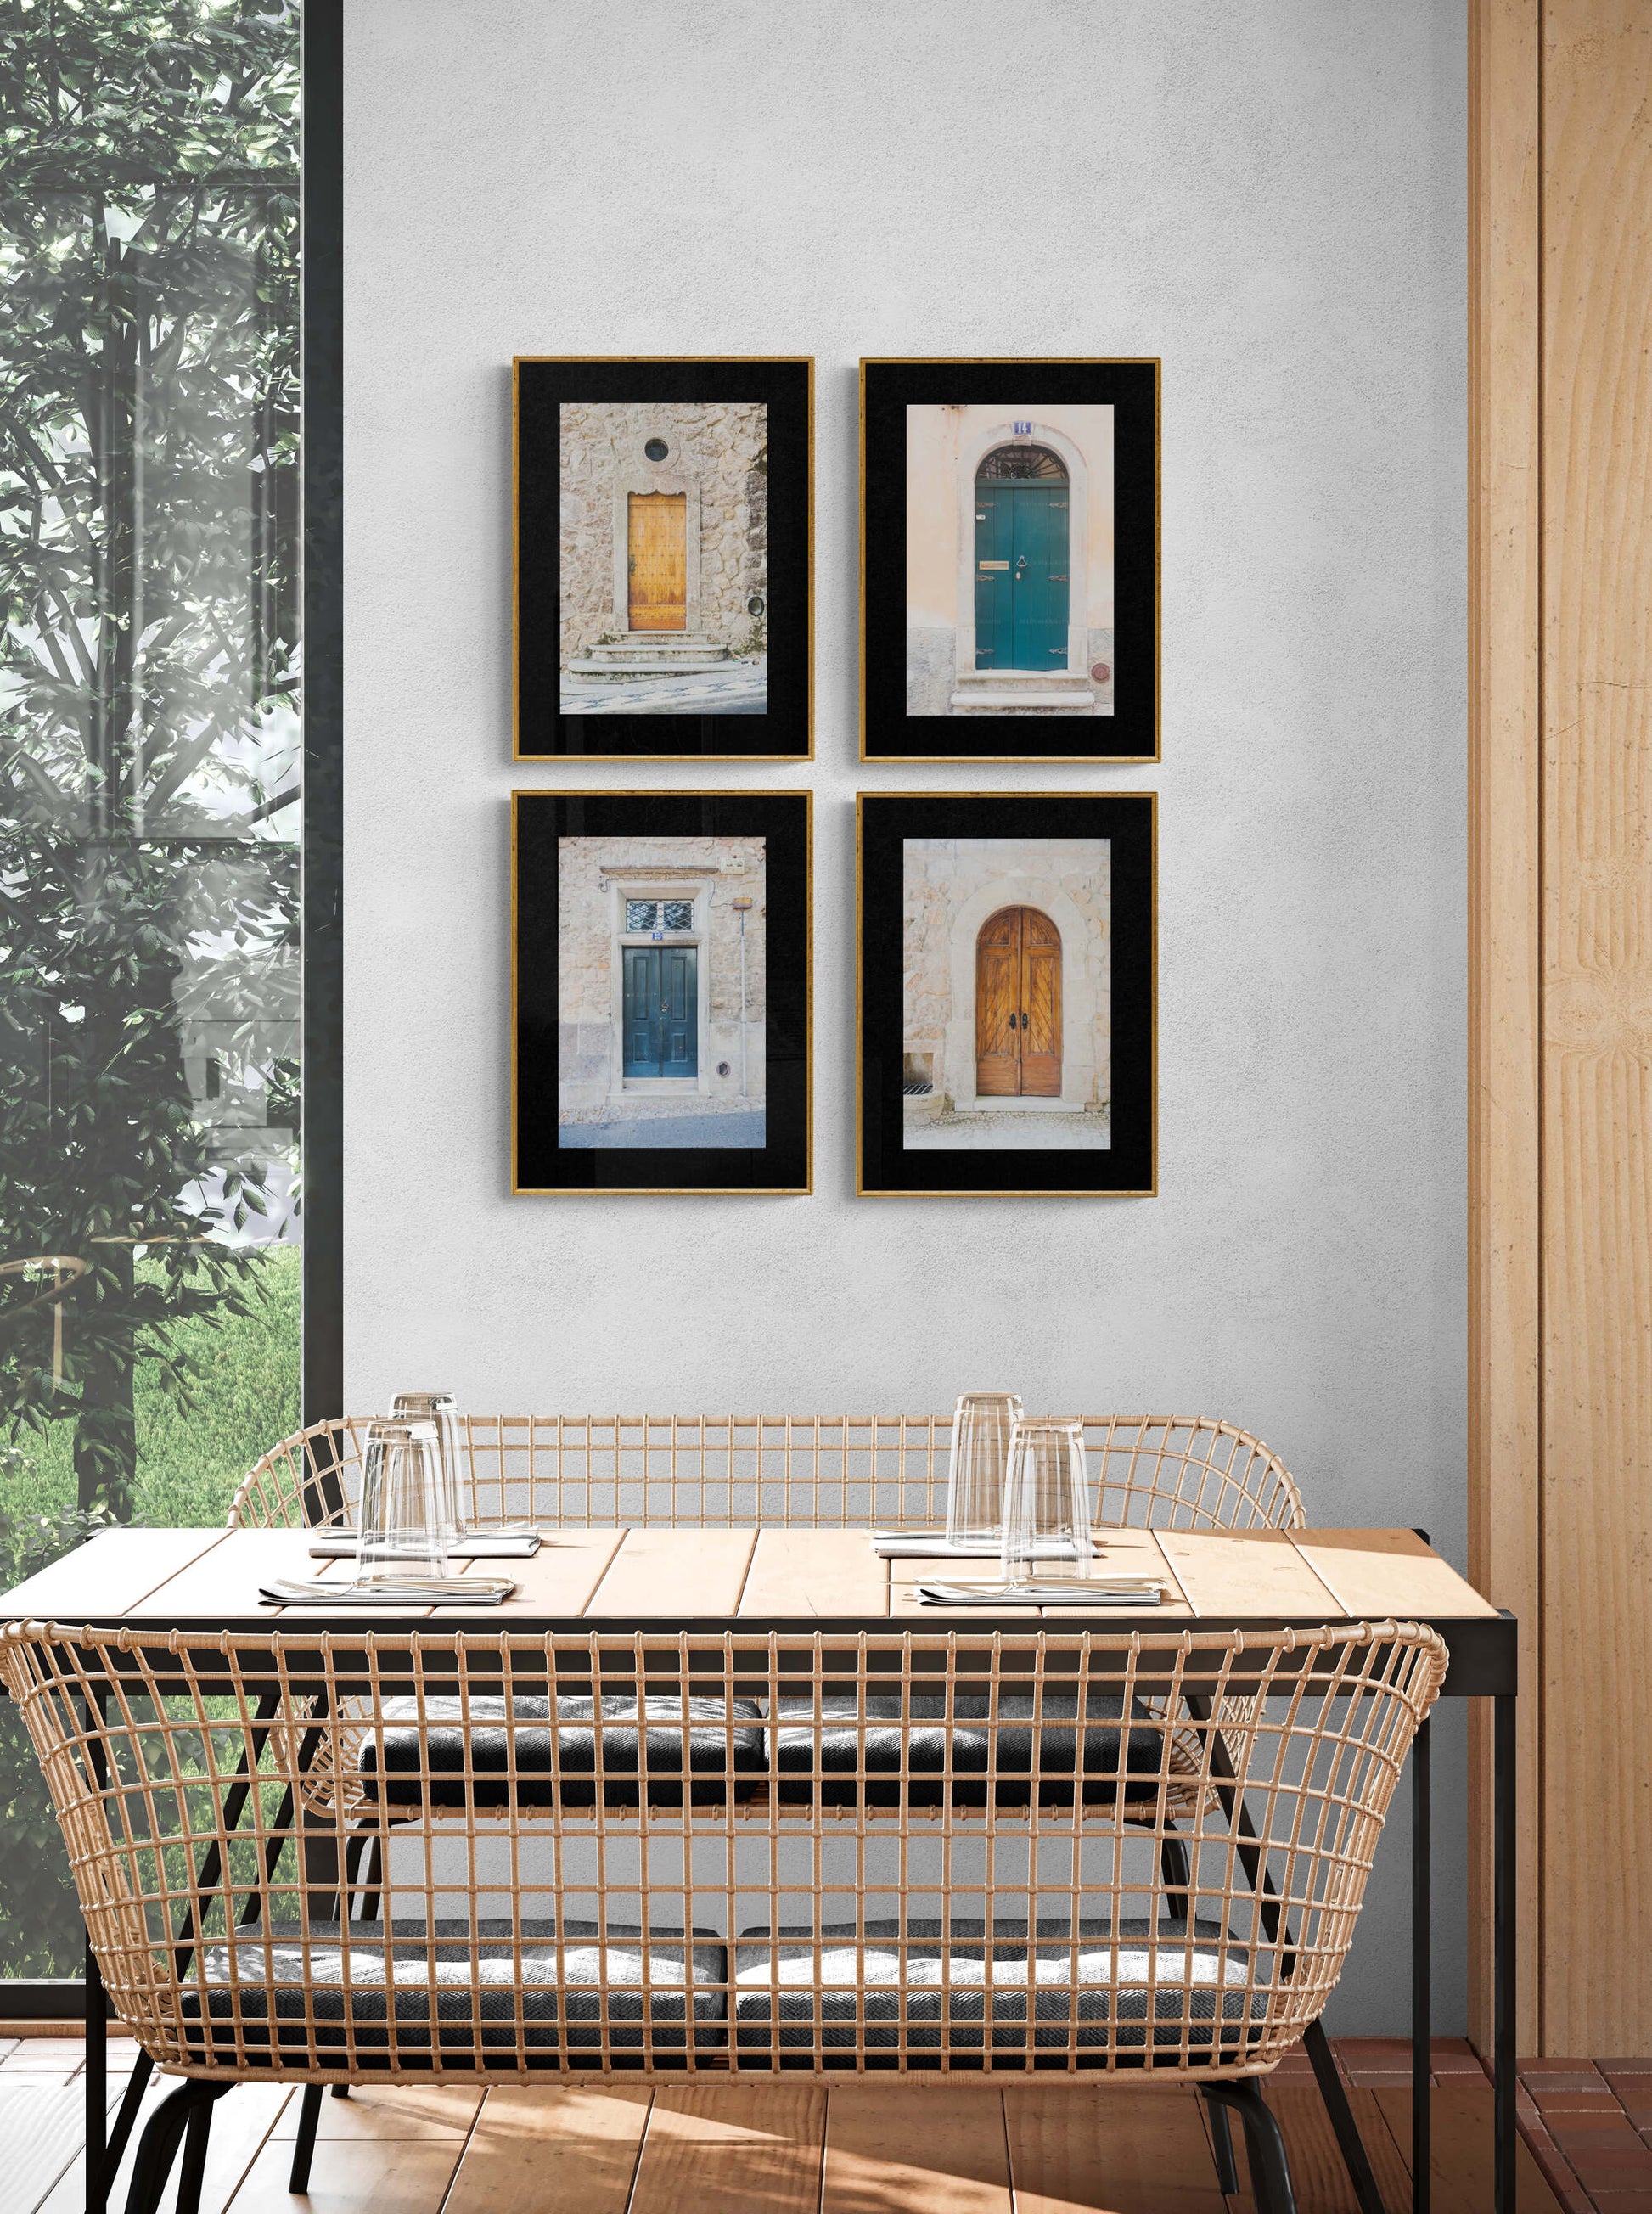 Set of 4 Door Photographs of Sintra Portugal shown in a kitchen as wall art